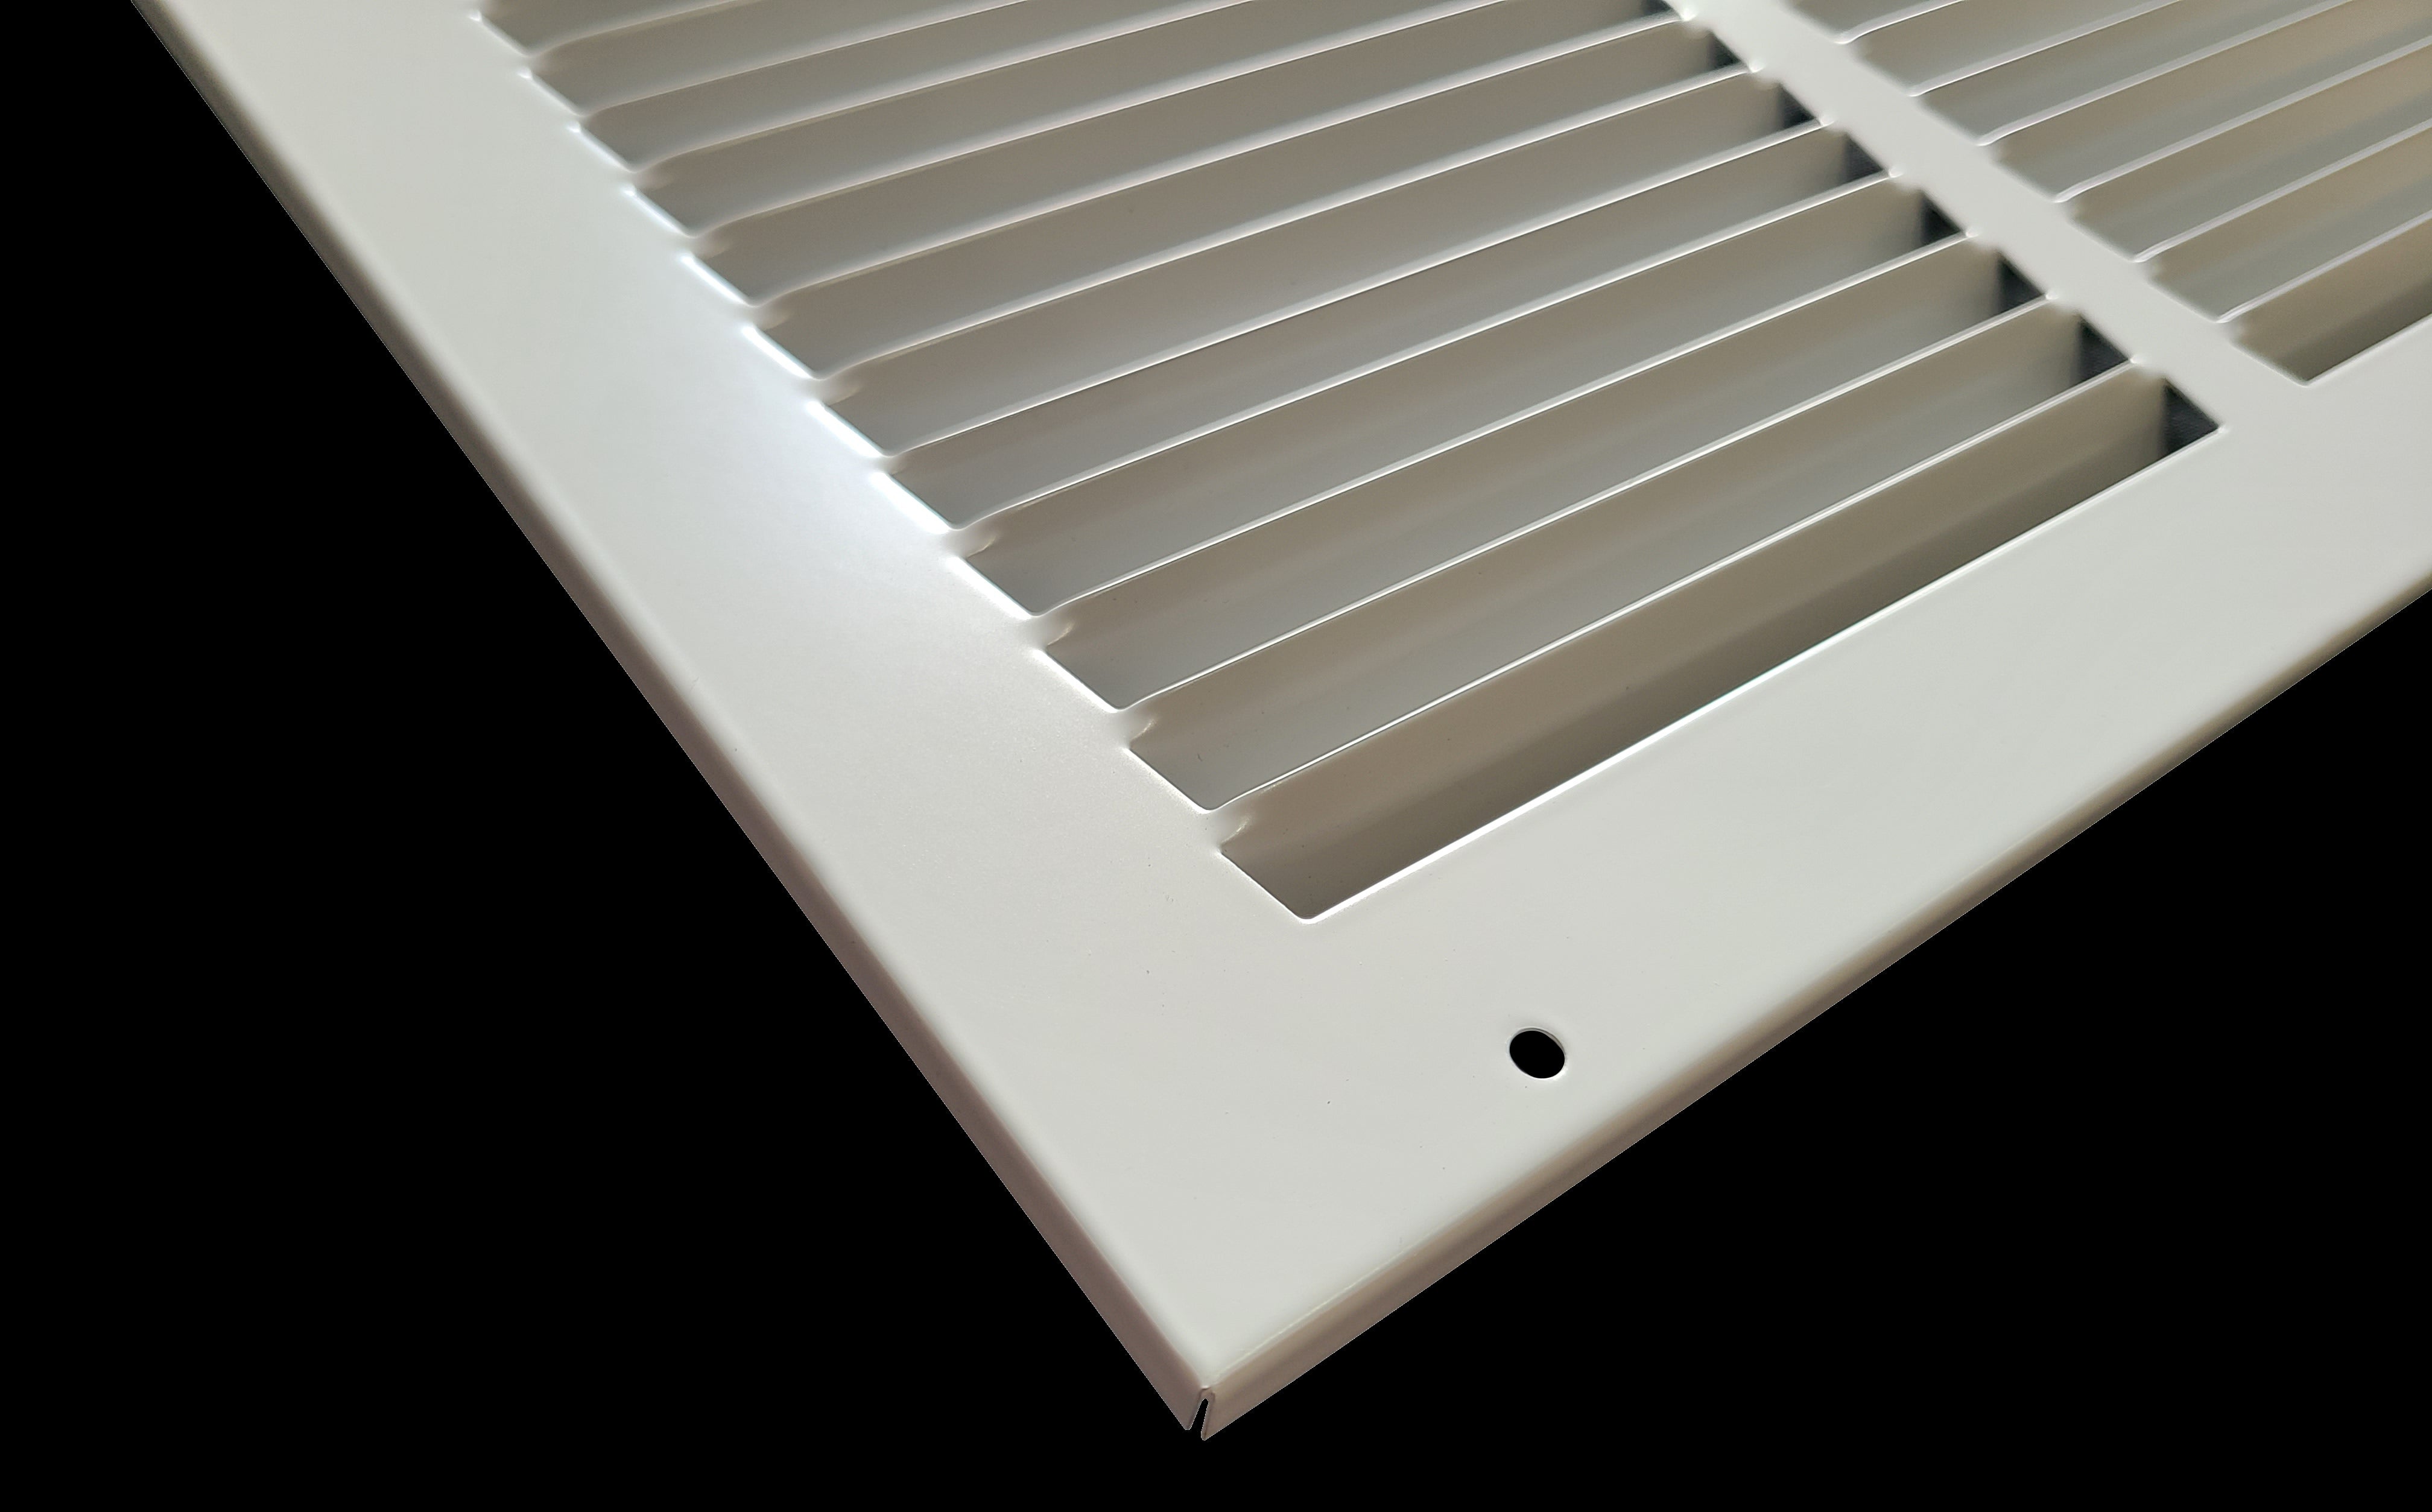 12" X 12" Duct Opening | Steel Return Air Grille for Sidewall and Ceiling | Outer Dimensions: 13.75"W X 13.75"H